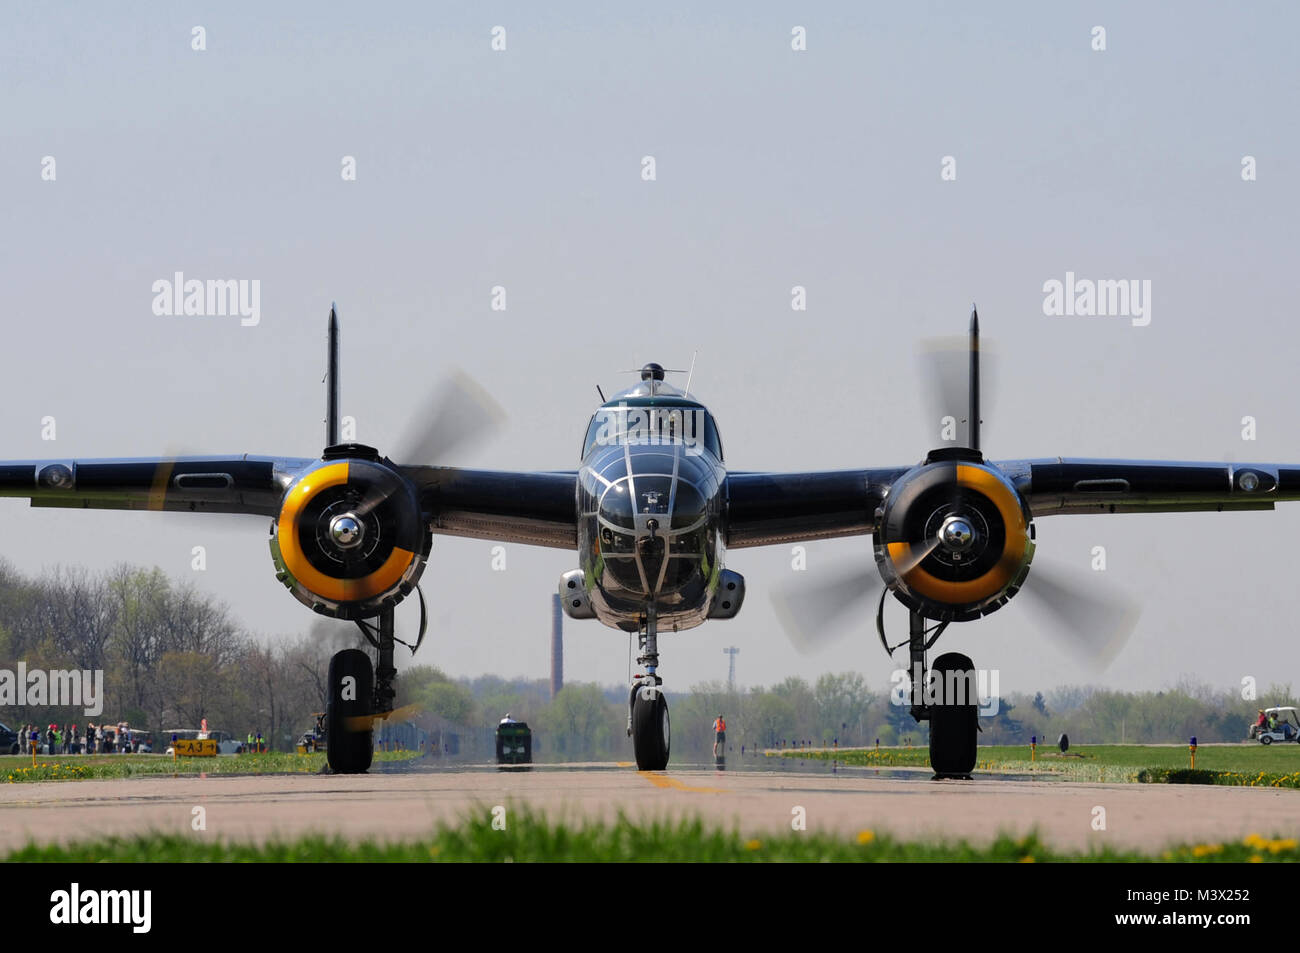 The 'Pacific Prowler,' a B-25 Mitchell Bomber, taxis the runway at Grimes Field, Ohio, April 15, 2010.  The B-25 crew flew from Fort Worth, Texas, to participate in commemoration flights for the Doolittle Raiders’ 68th reunion at Wright Patterson Air Force Base, Ohio.  The event honors the anniversary of the Doolittle Tokyo Raid.  On April 18, 1942, U.S. Army Air Forces Lt. Col. Jimmy Doolittle’s squad of 16 B-25s bombed targets over Japan in response to the Japanese attack on Pearl Harbor. (U.S. Air Force photo by Tech. Sgt. Jacob N. Bailey / Released) 100415-F-5964B-276 by AirmanMagazine Stock Photo